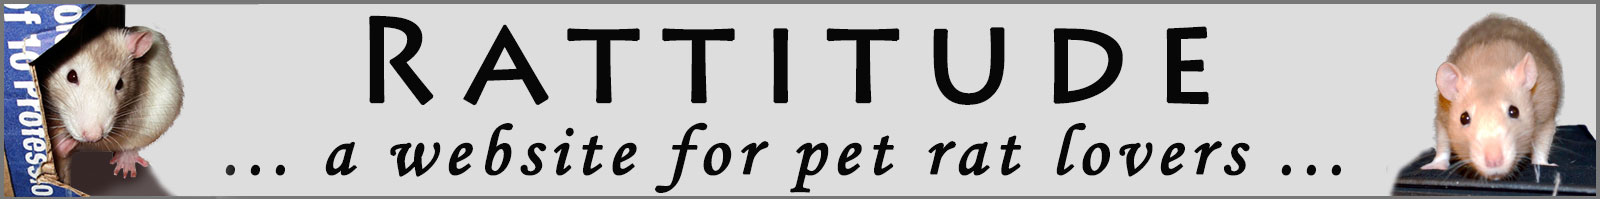 Rattitude, The Website for Pet Rat Lovers